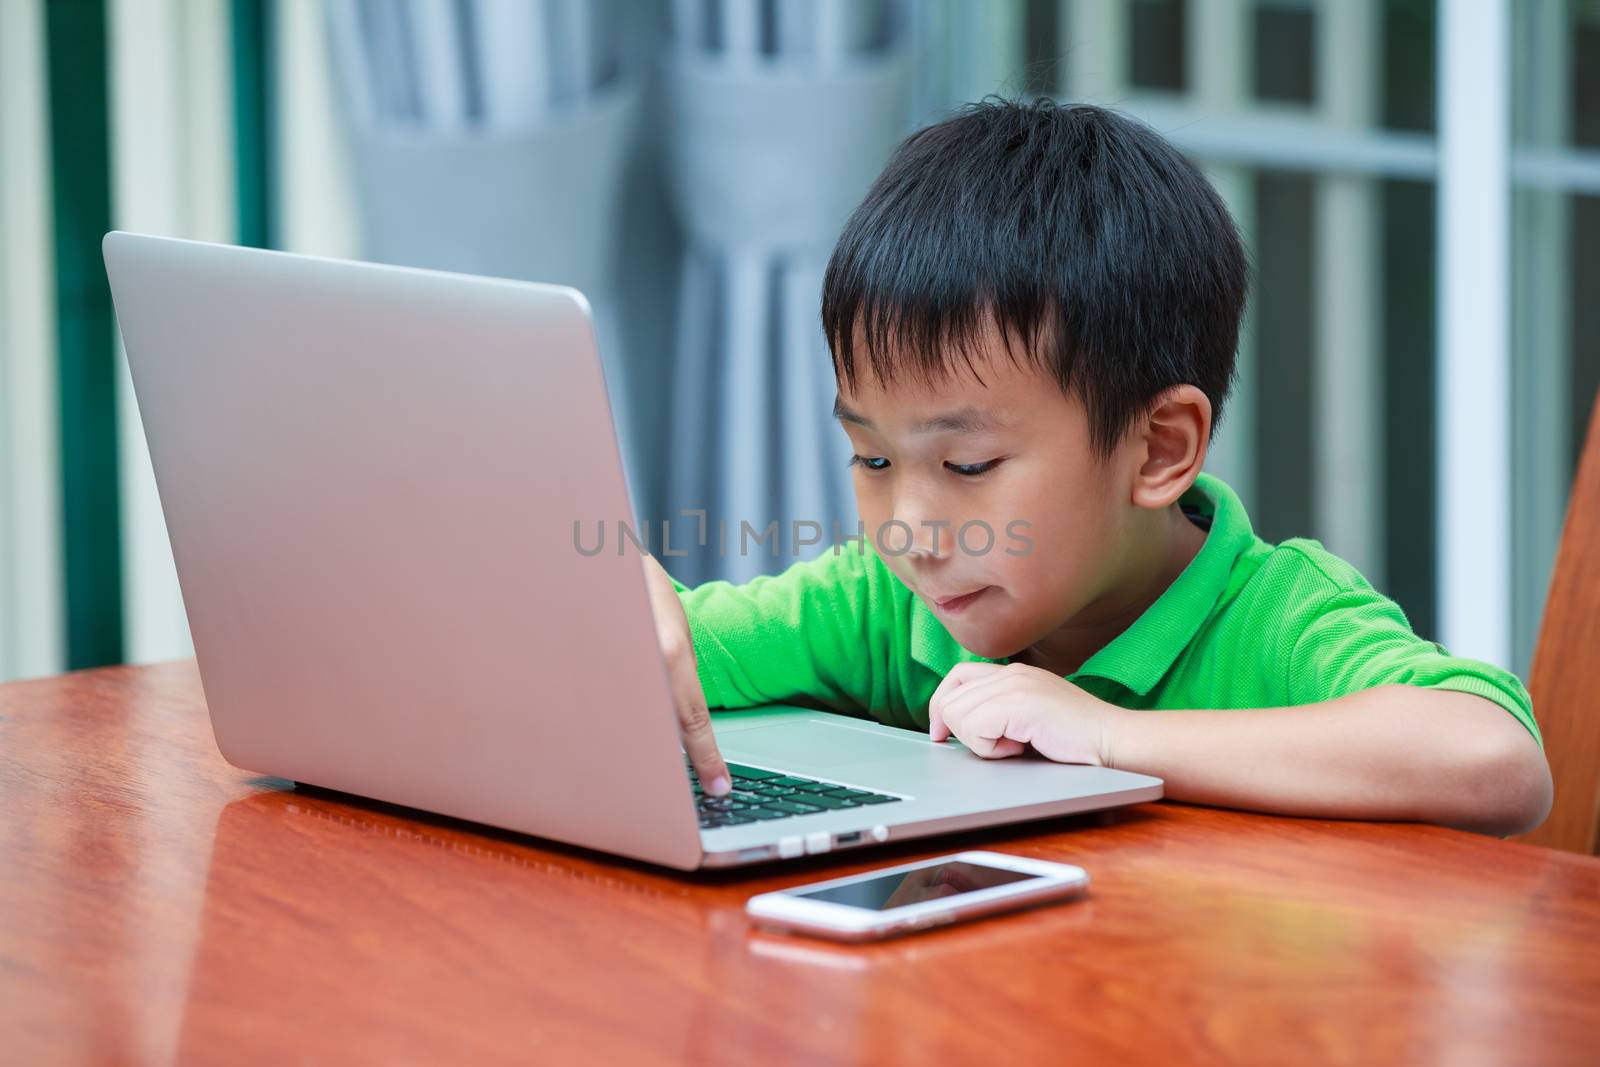 Happy asian child. Handsome boy enjoying modern generation technologies playing indoors using laptop computer and mobile phone. Education and learning concept.